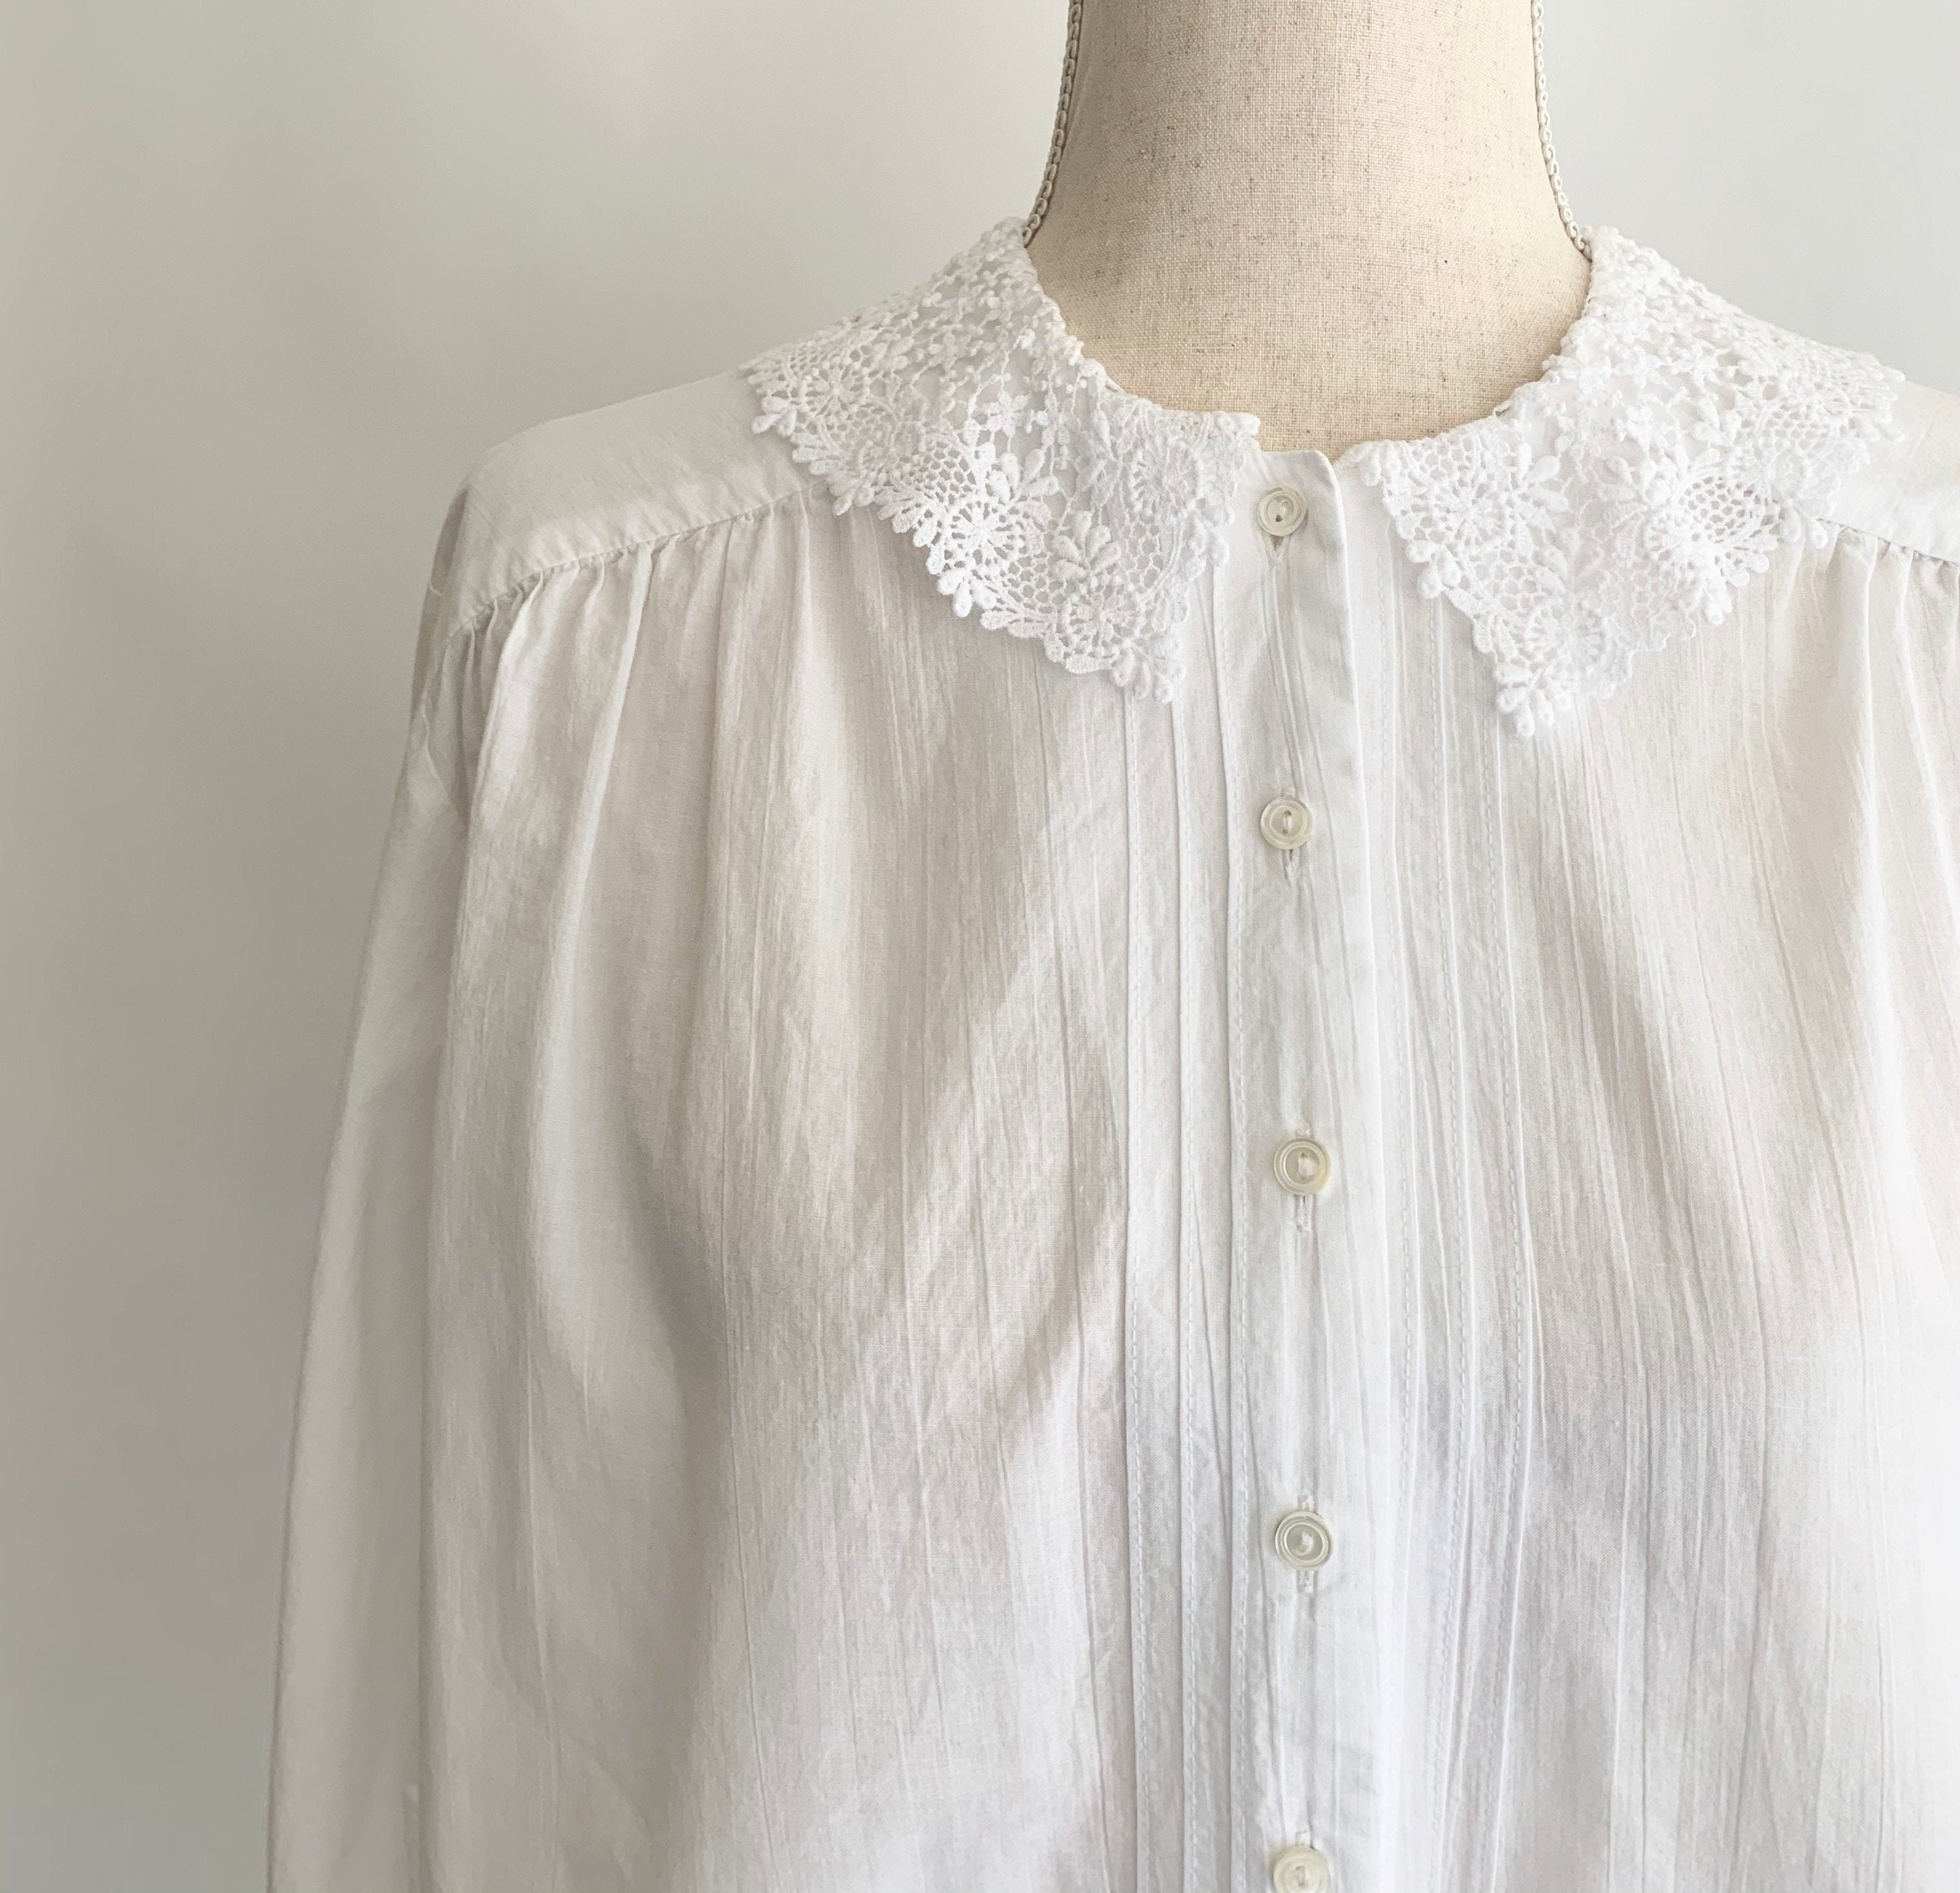 Laura Ashley Cotton Blouse Vintage 80s Scallop Crochet Collar Made in ...